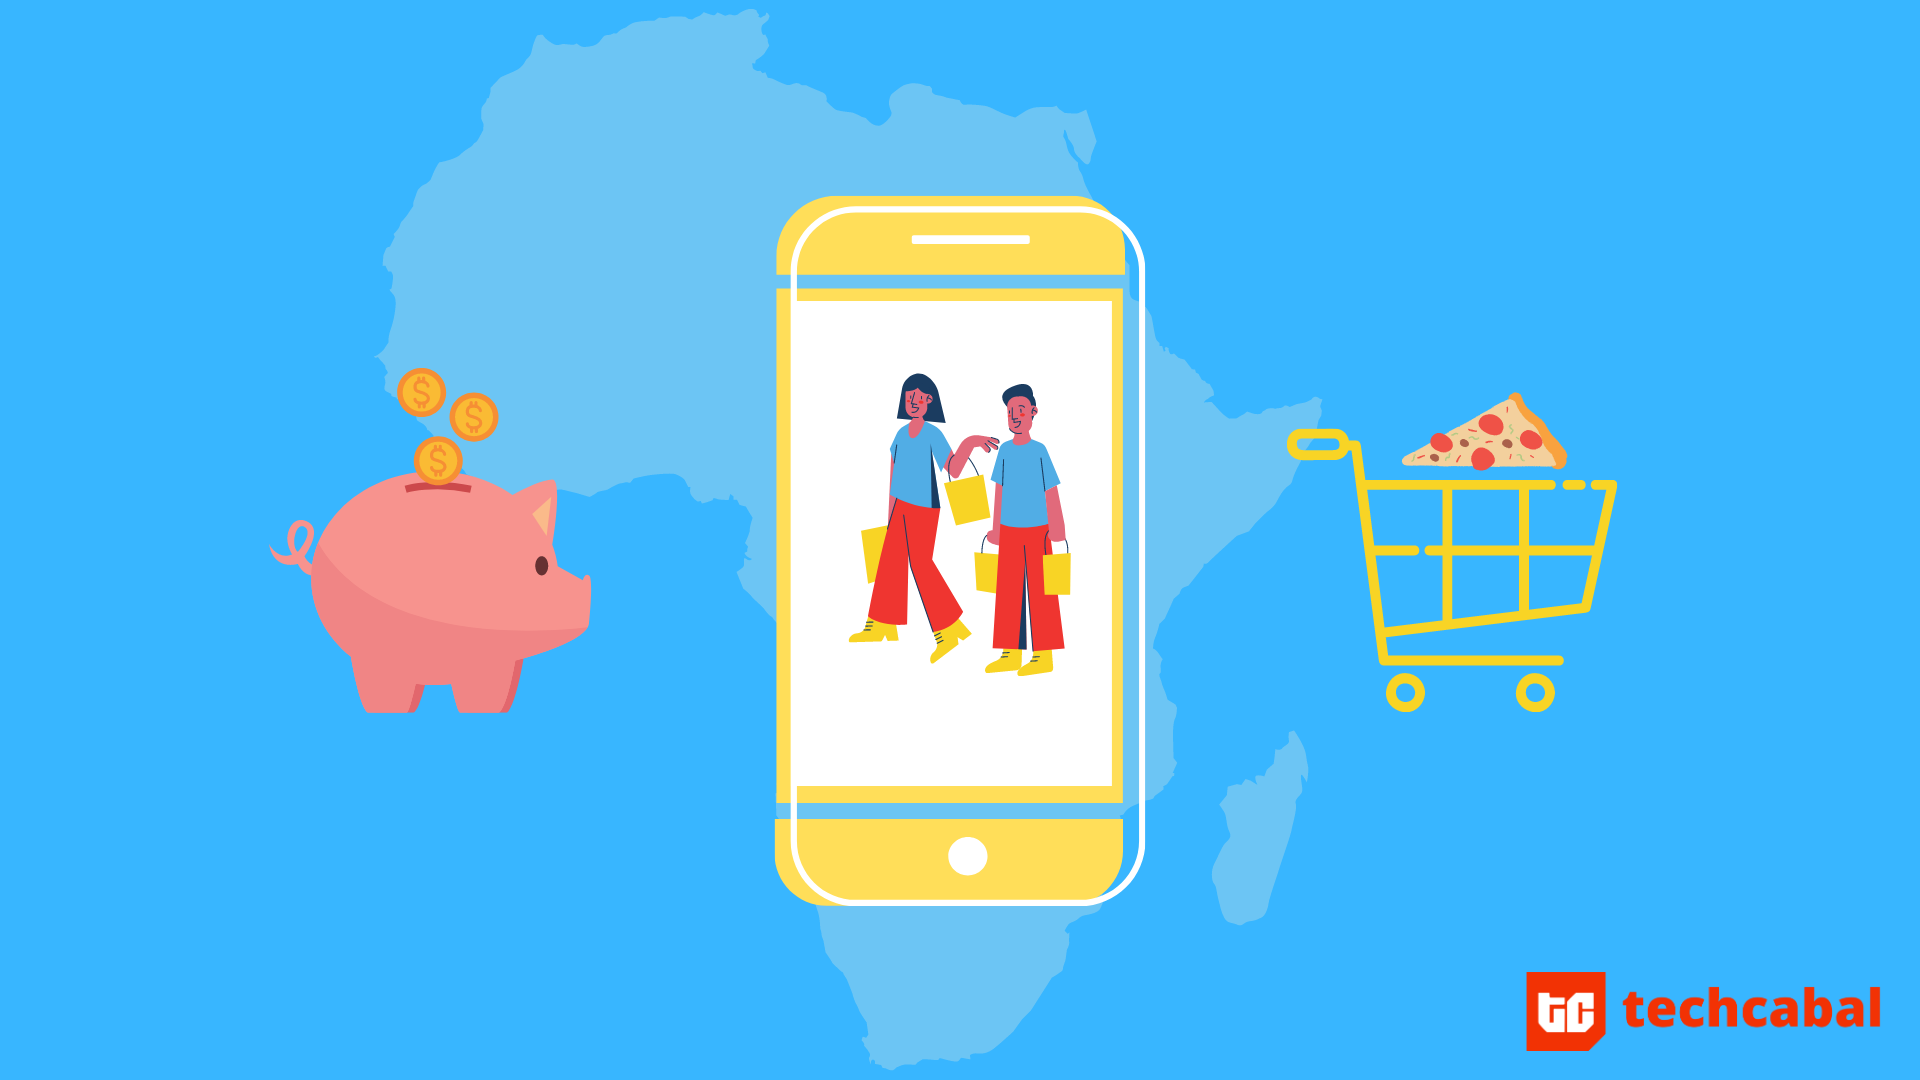 The Subsequent Wave: Gigantic Tech’s trim app potential in Africa